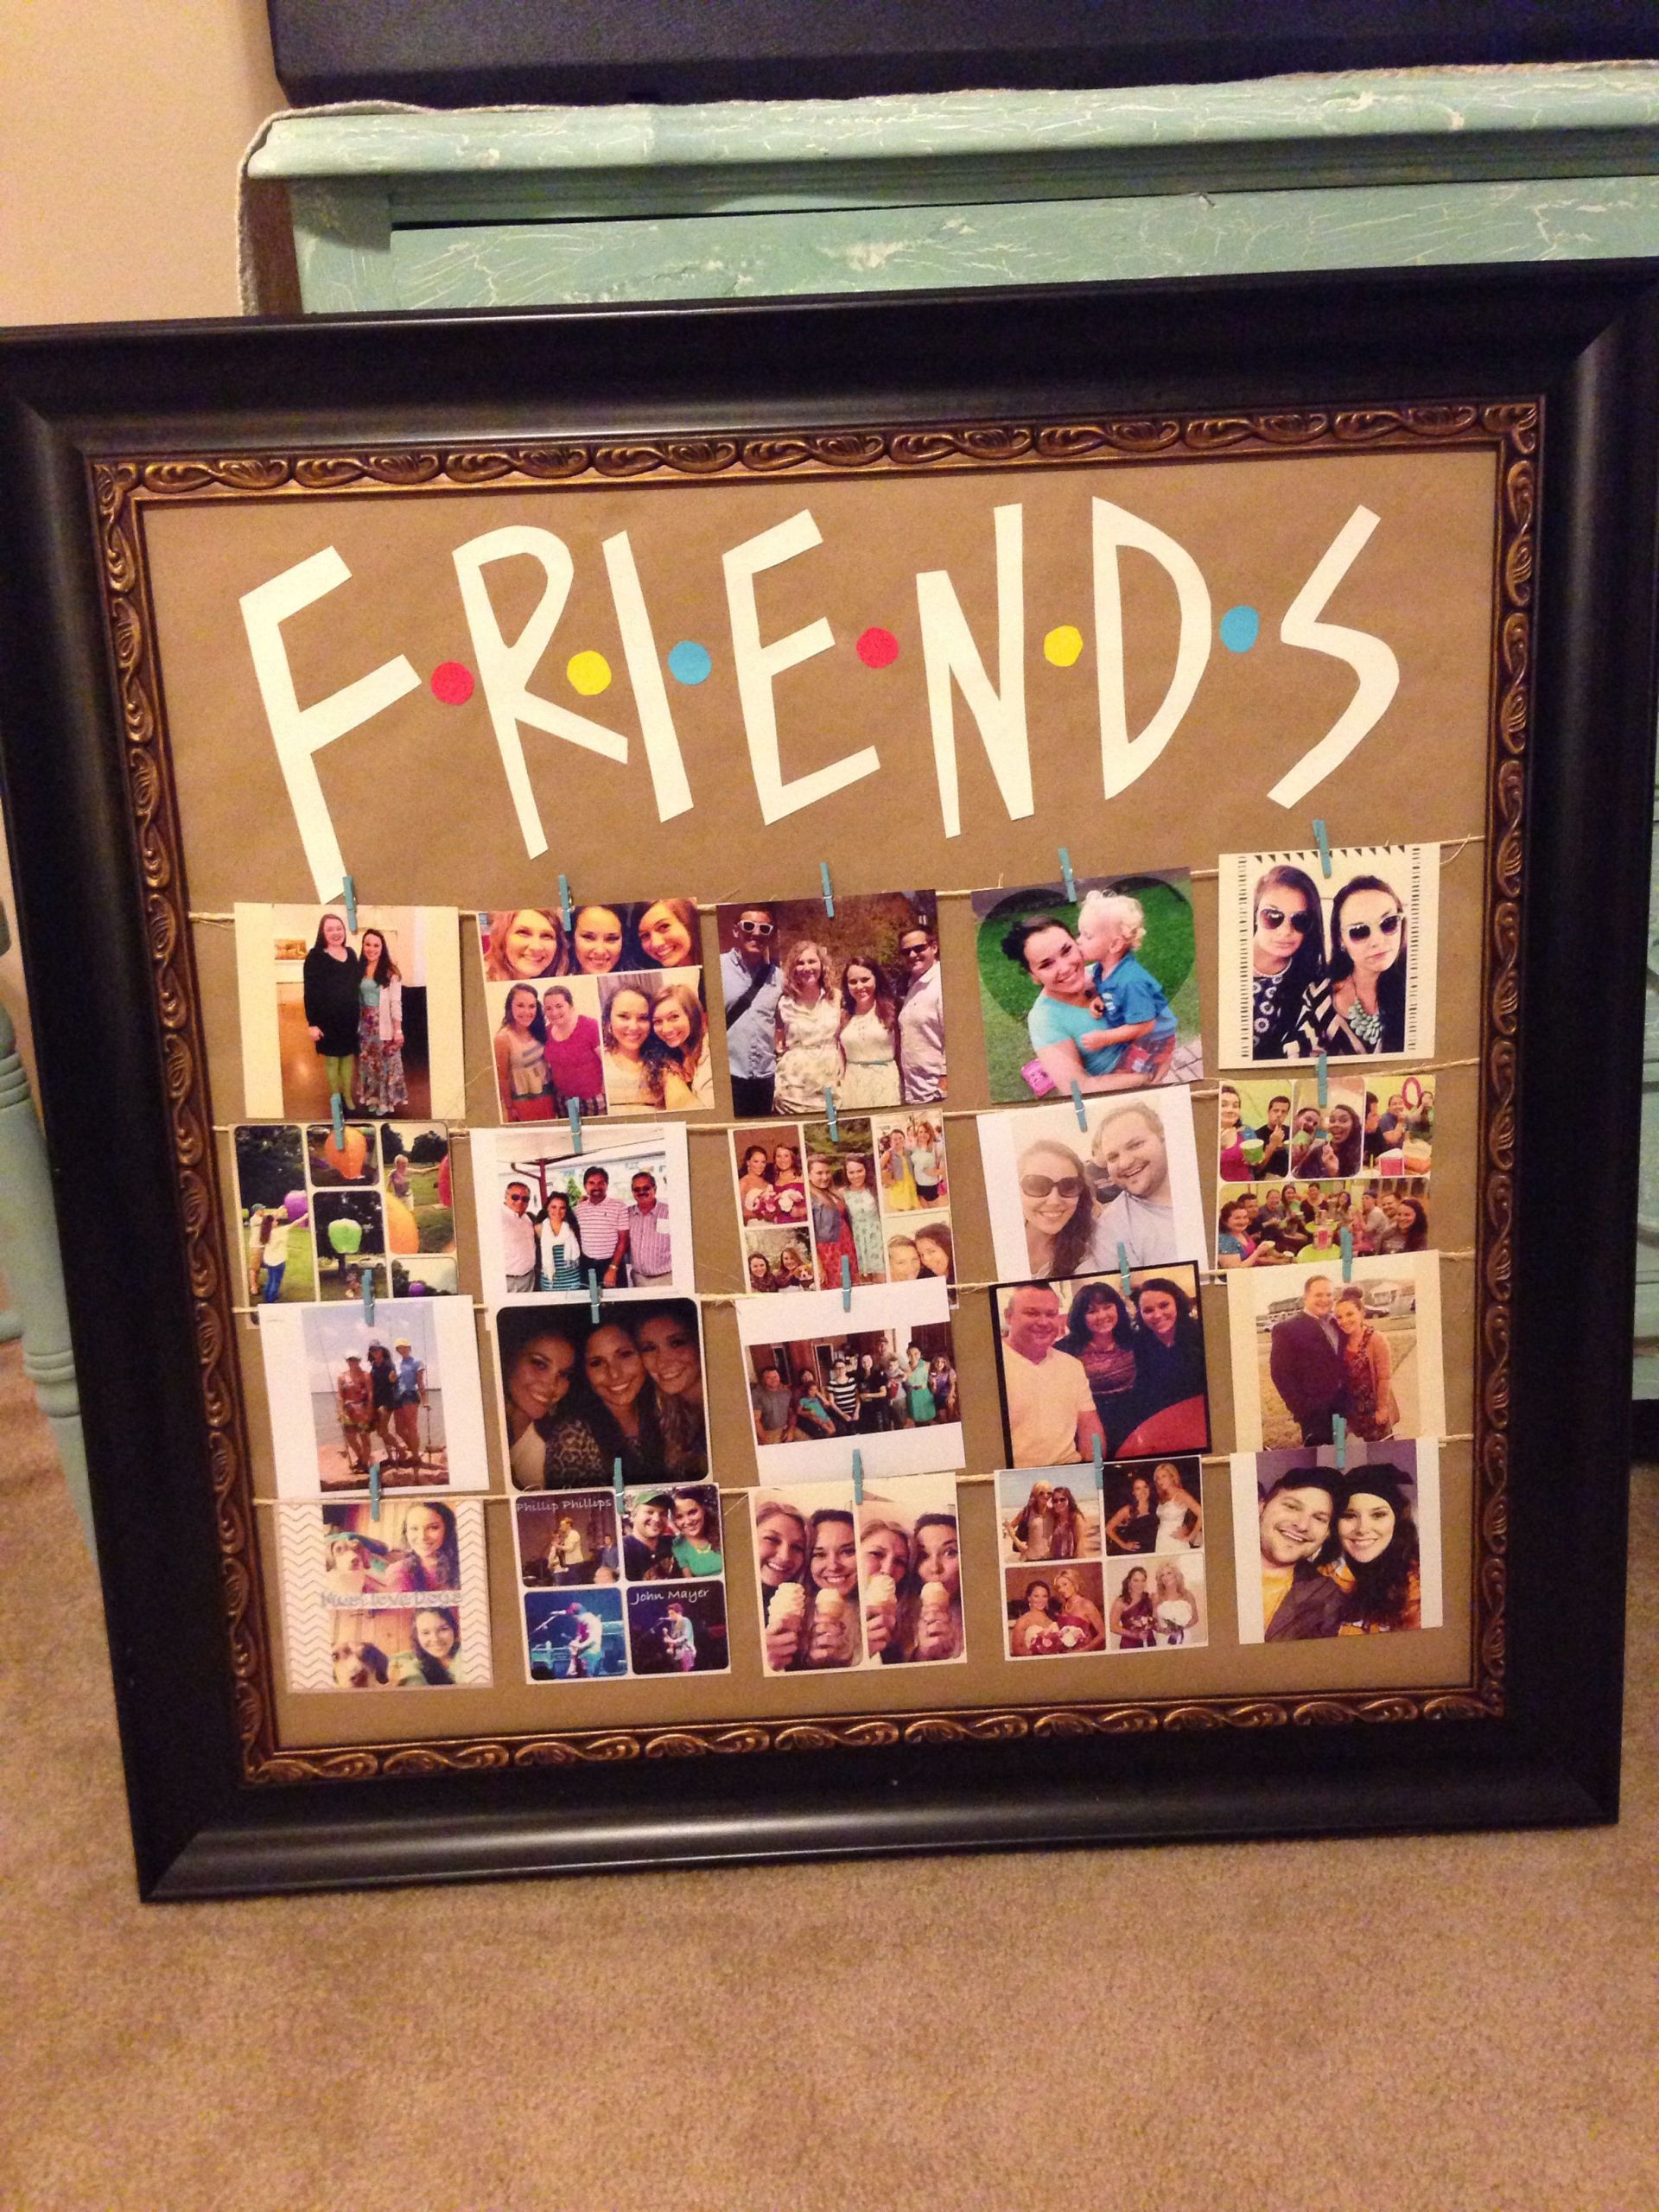 Diy Birthday Gift Ideas For Best Friend
 Friends tv show picture frame diy party ideas